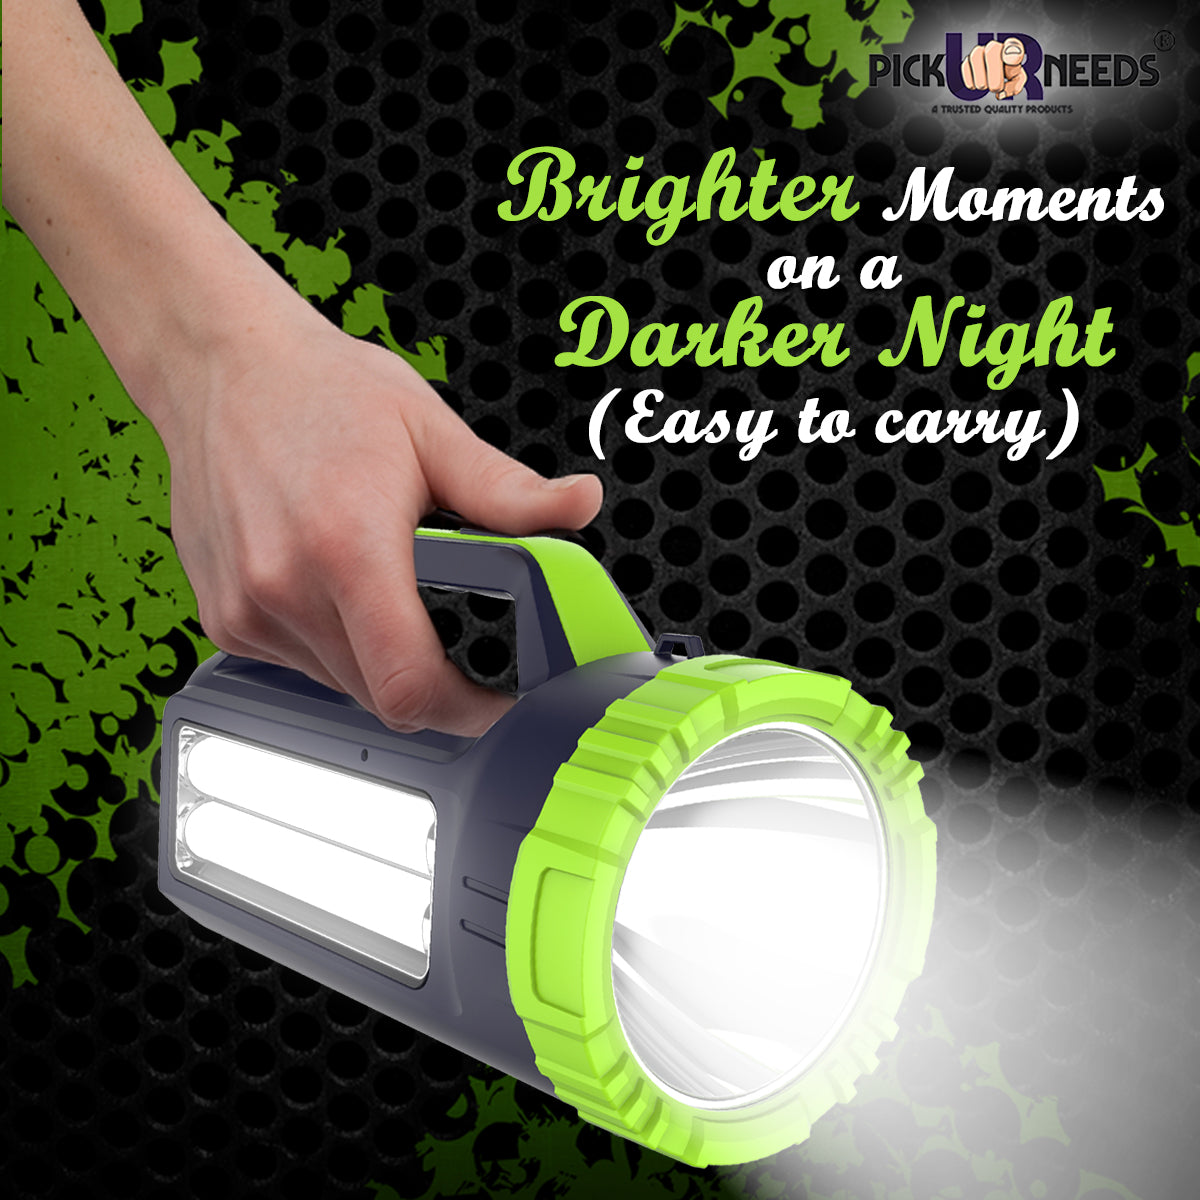 Pick Ur Needs Long Range Search Torch Light Emergency Rechargeable Handheld Torch + Side 2 Tube